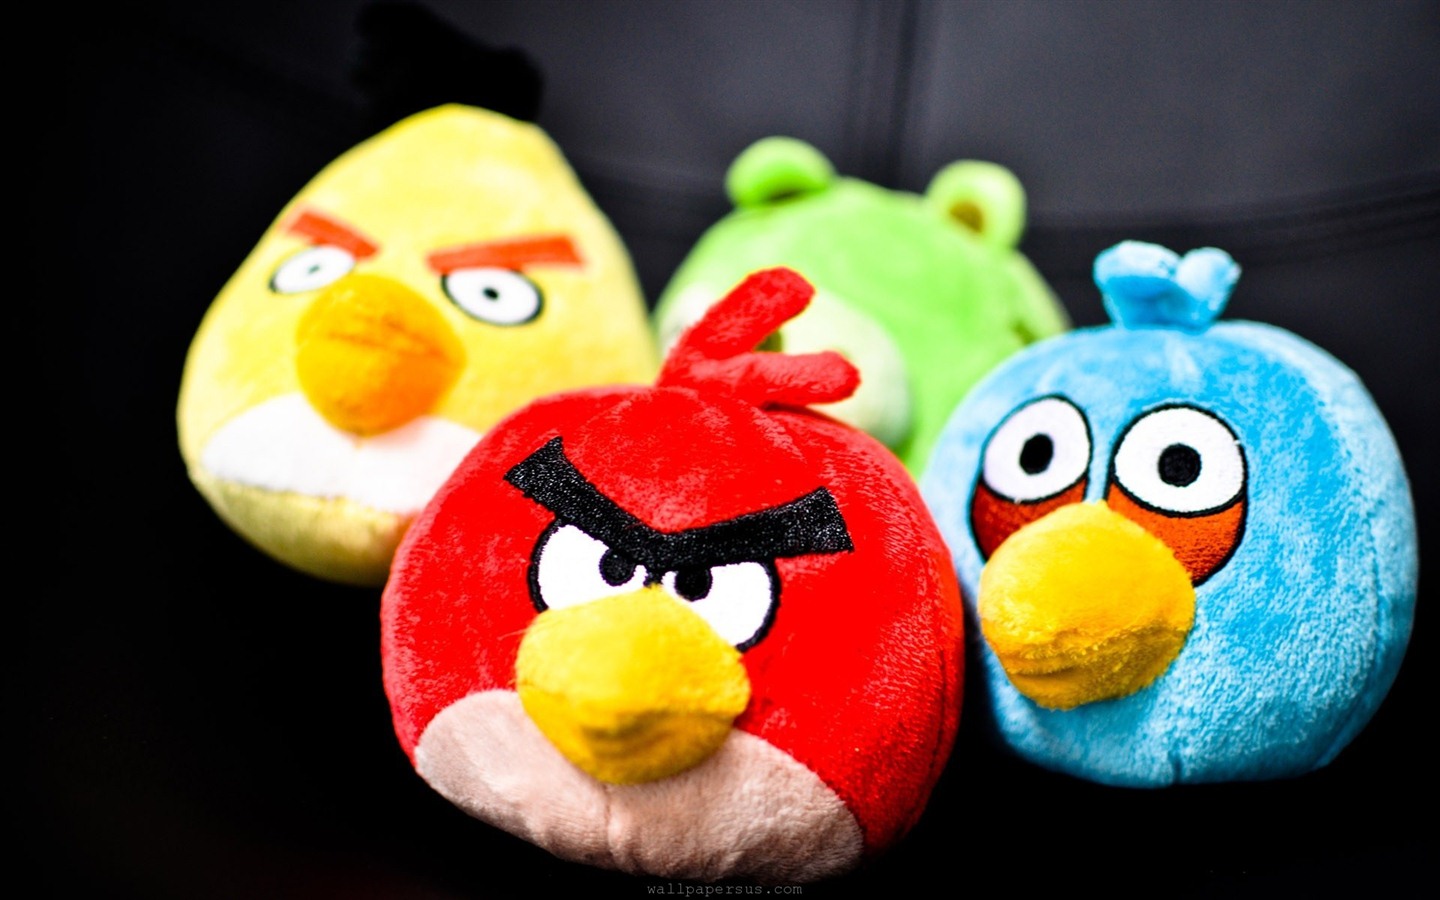 Angry Birds Game Wallpapers #16 - 1440x900